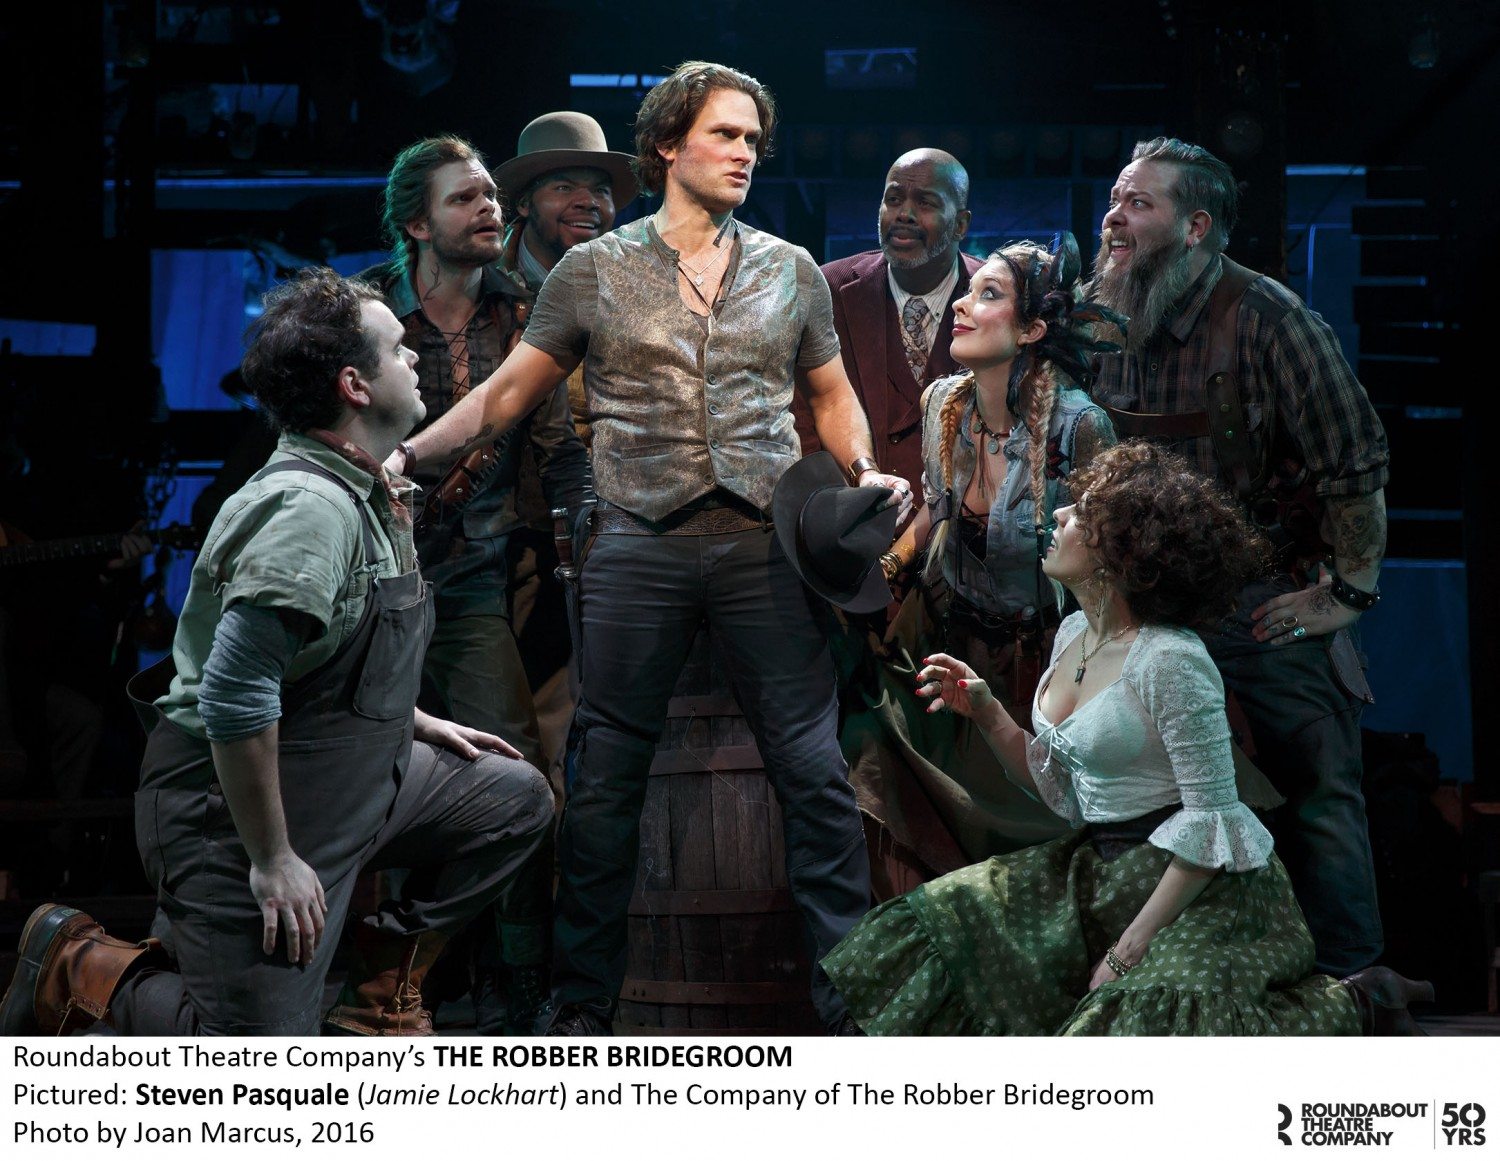 Steven Pasquale Talks “The Robber Bridegroom,” New York, Broadway, Working on “Rescue Me” and More